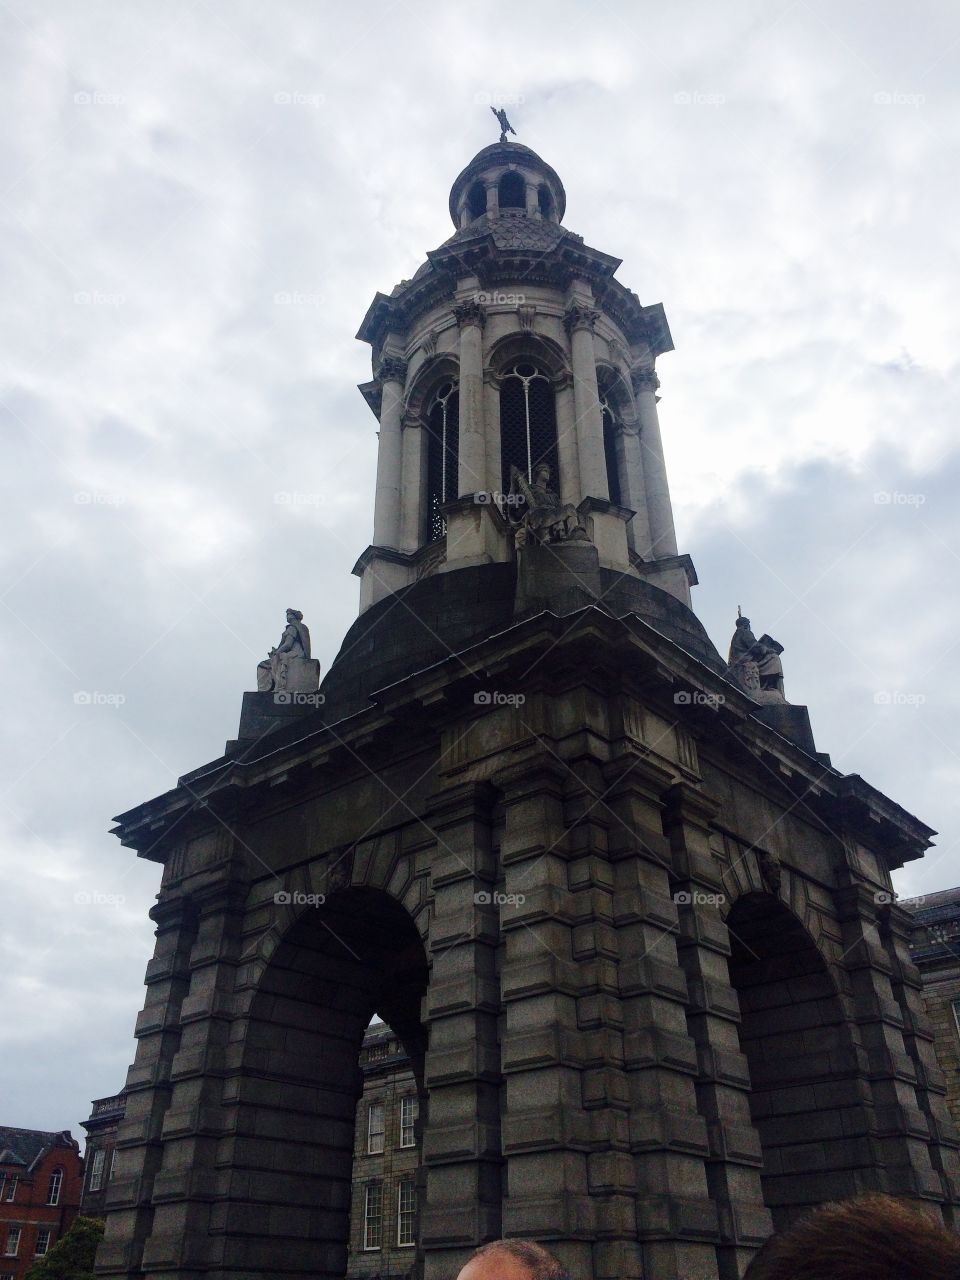 Historical tower and architecture at Trinity college in Dublin Ireland against cloudy Autumn sky 